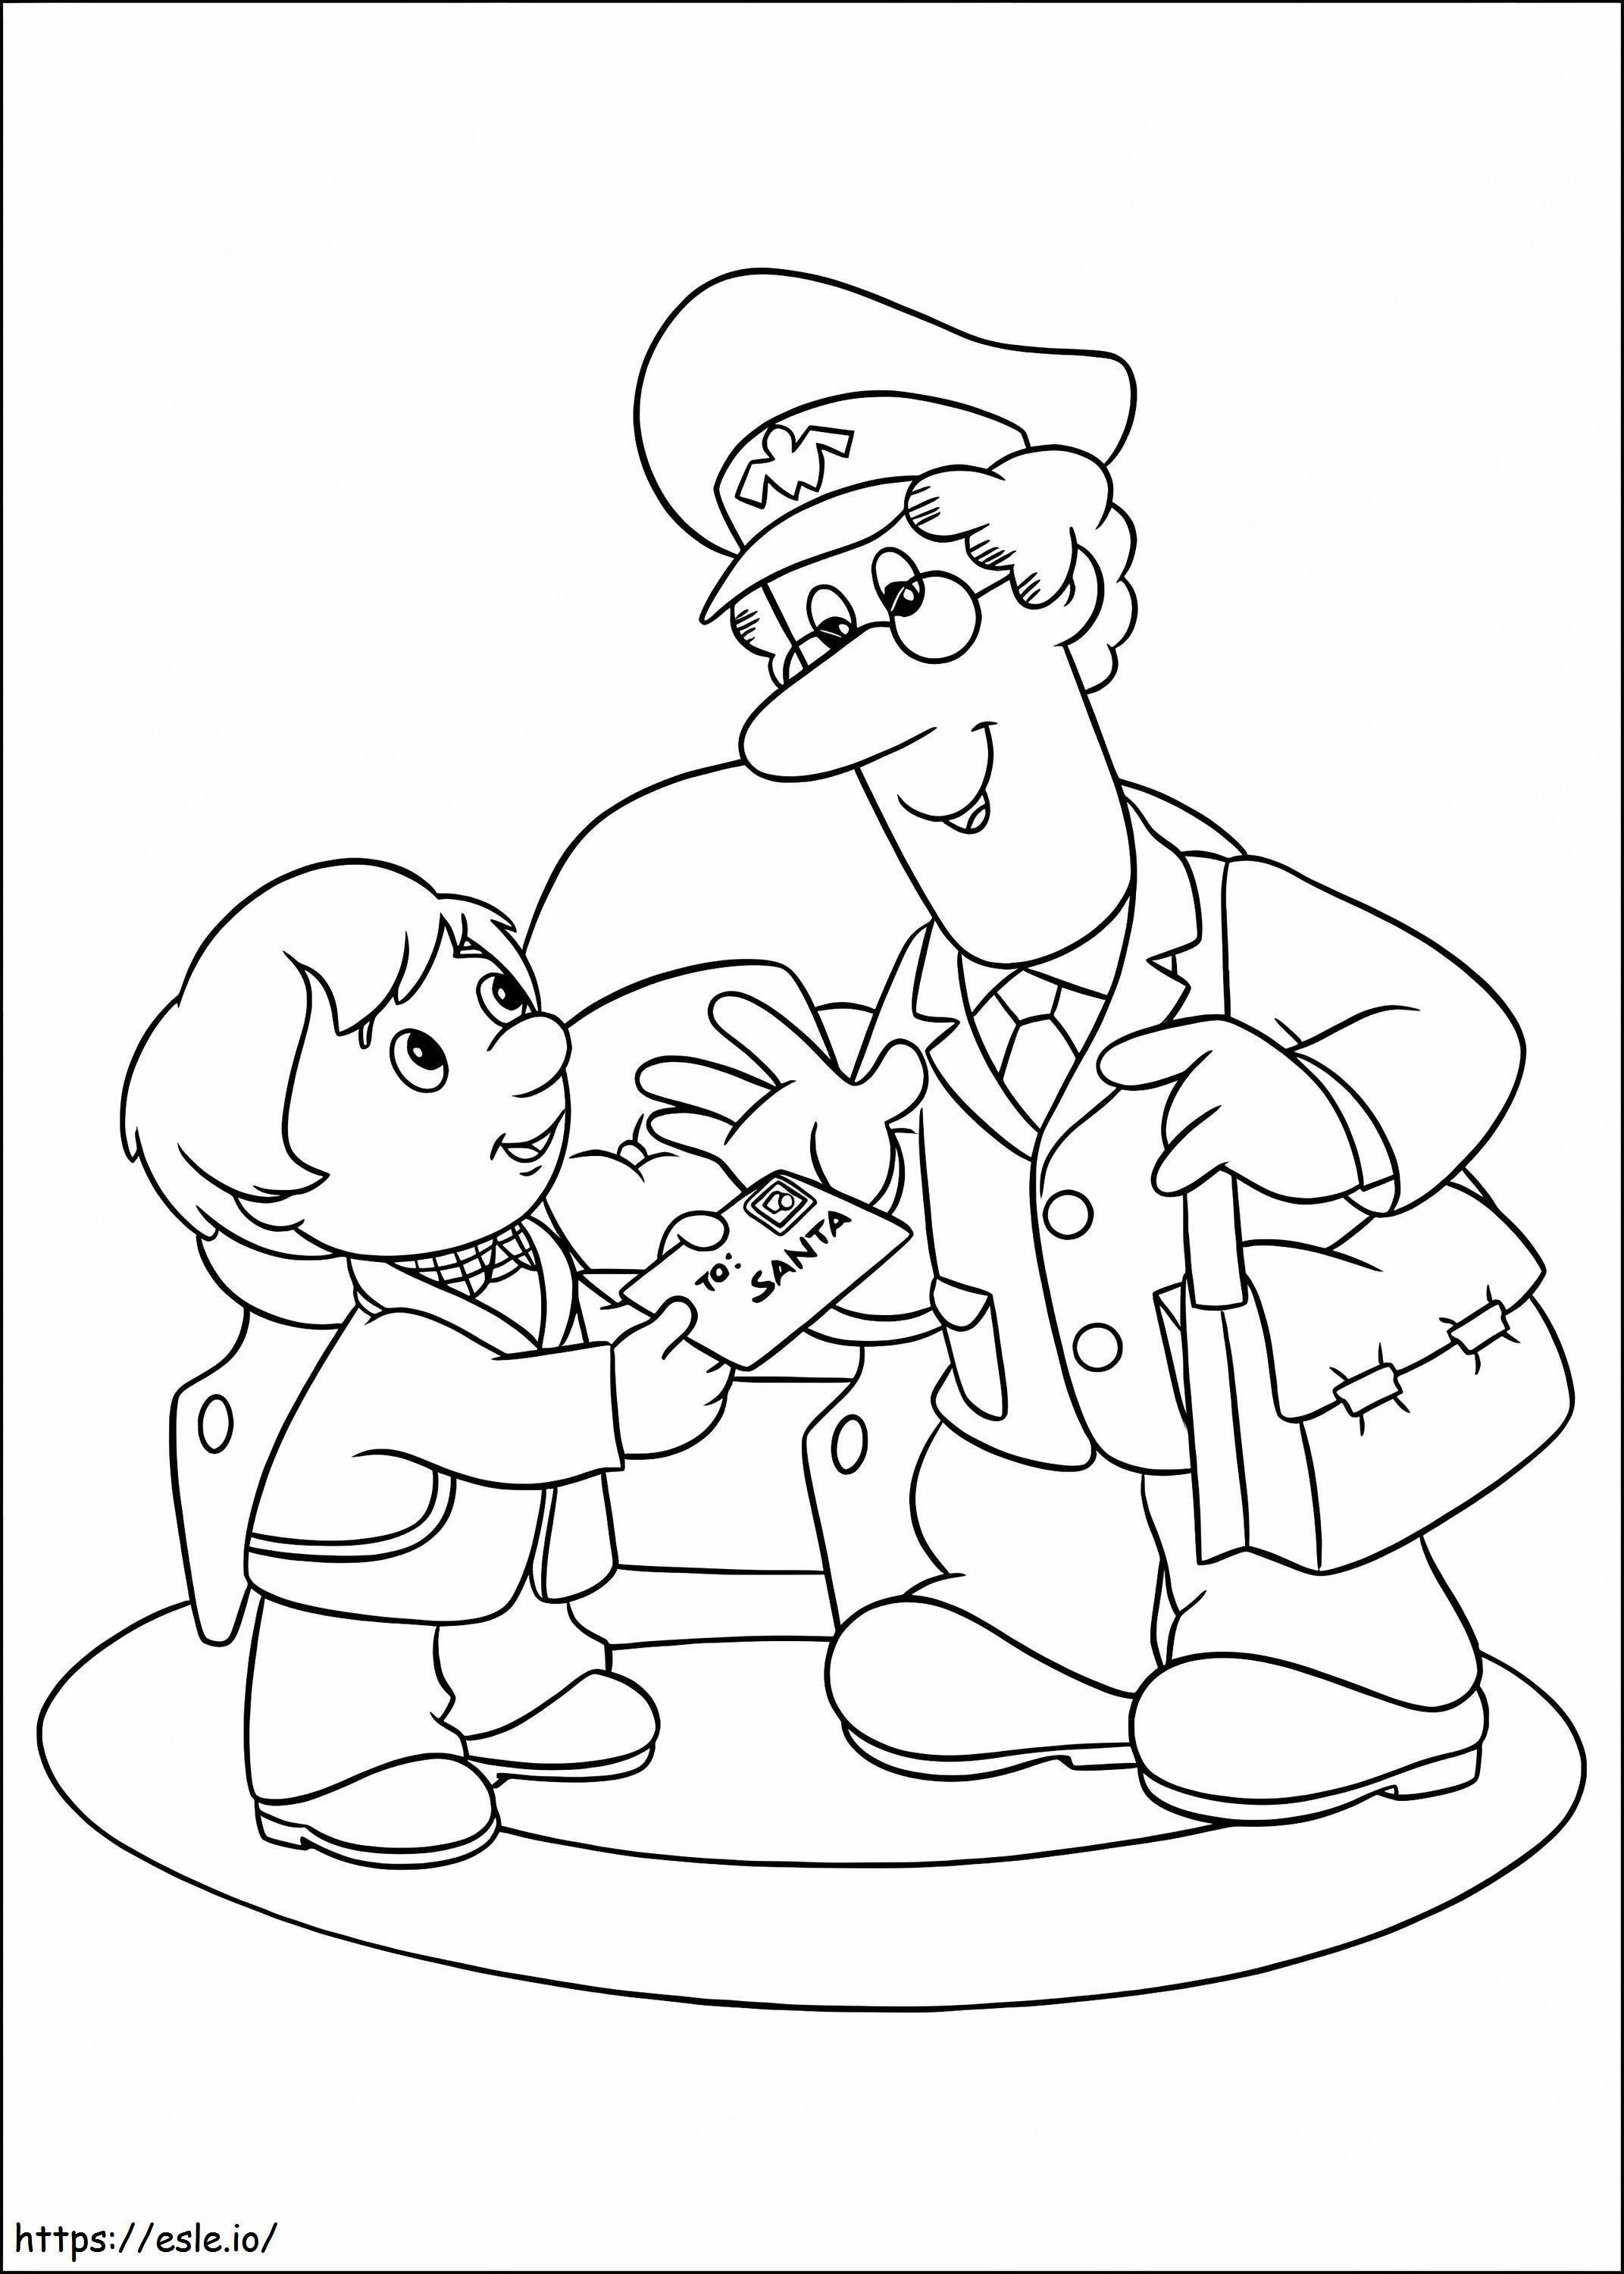 Postman Pat Awesome coloring page